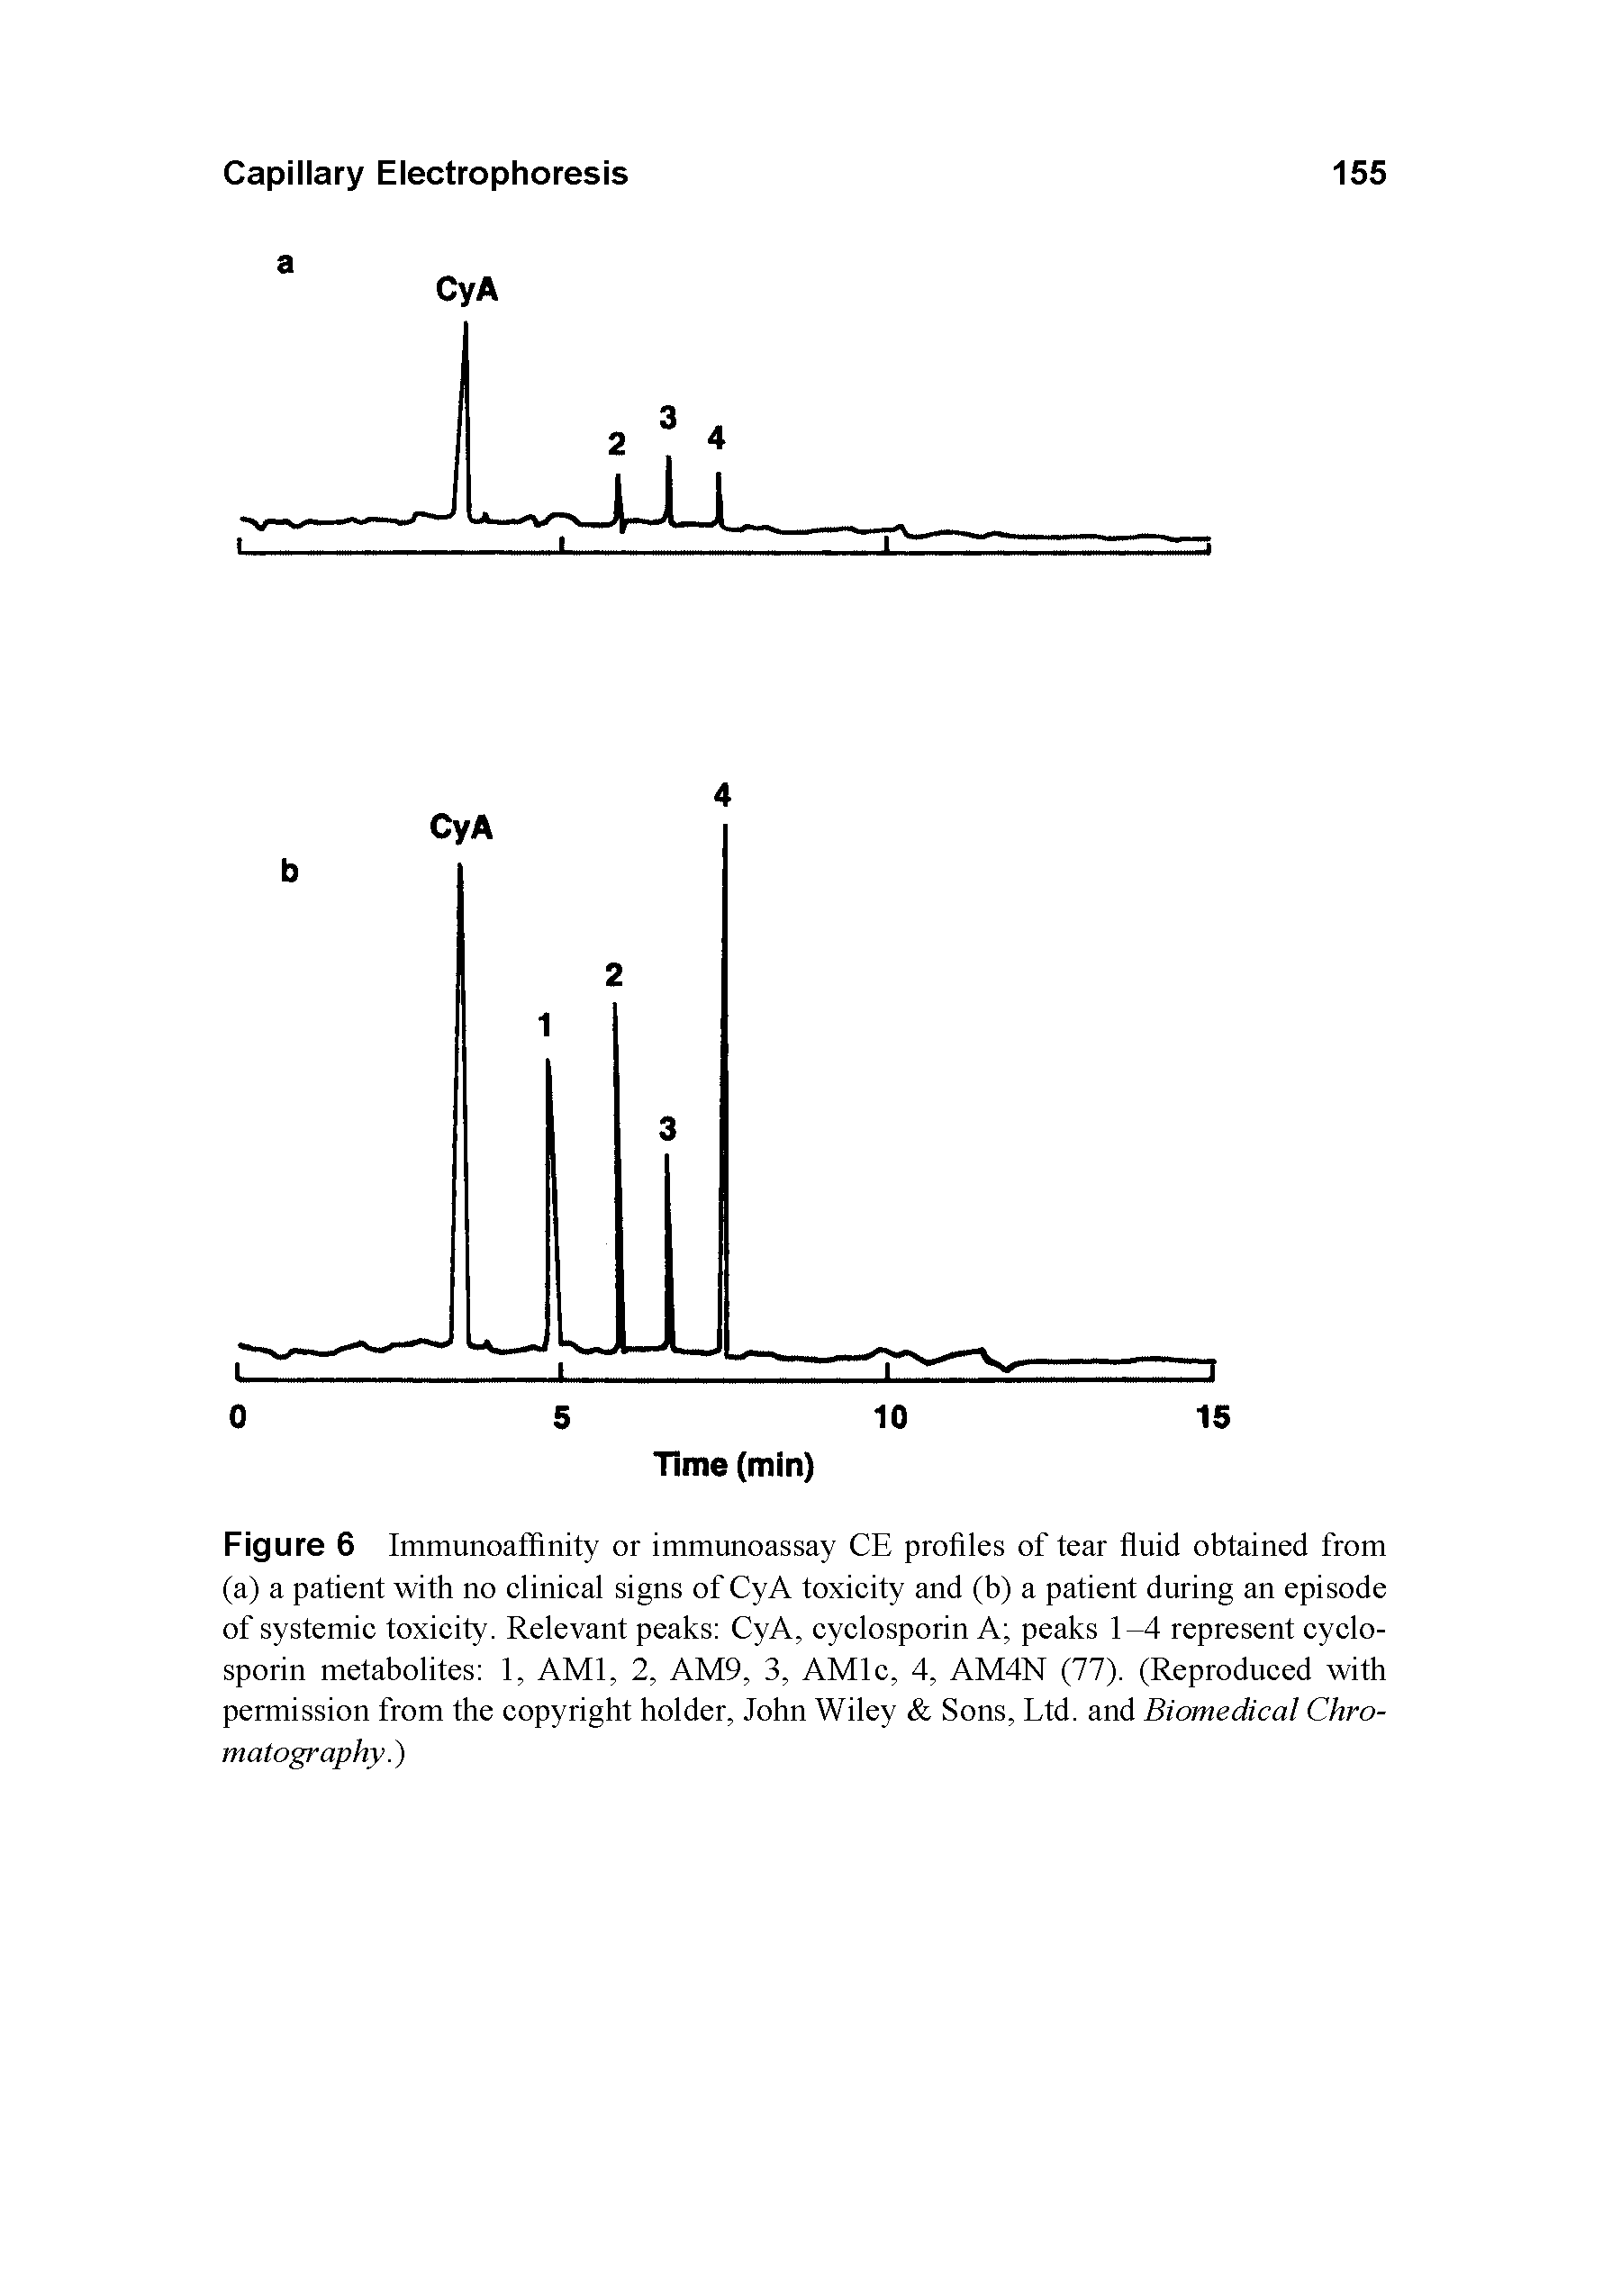 Figure 6 Immunoaffinity or immunoassay CE profiles of tear fluid obtained from (a) a patient with no clinical signs of CyA toxicity and (b) a patient during an episode of systemic toxicity. Relevant peaks CyA, cyclosporin A peaks 1-4 represent cyclosporin metabolites 1, AMI, 2, AM9, 3, AMlc, 4, AM4N (77). (Reproduced with permission from the copyright holder, John Wiley Sons, Ltd. and Biomedical Chromatography.)...